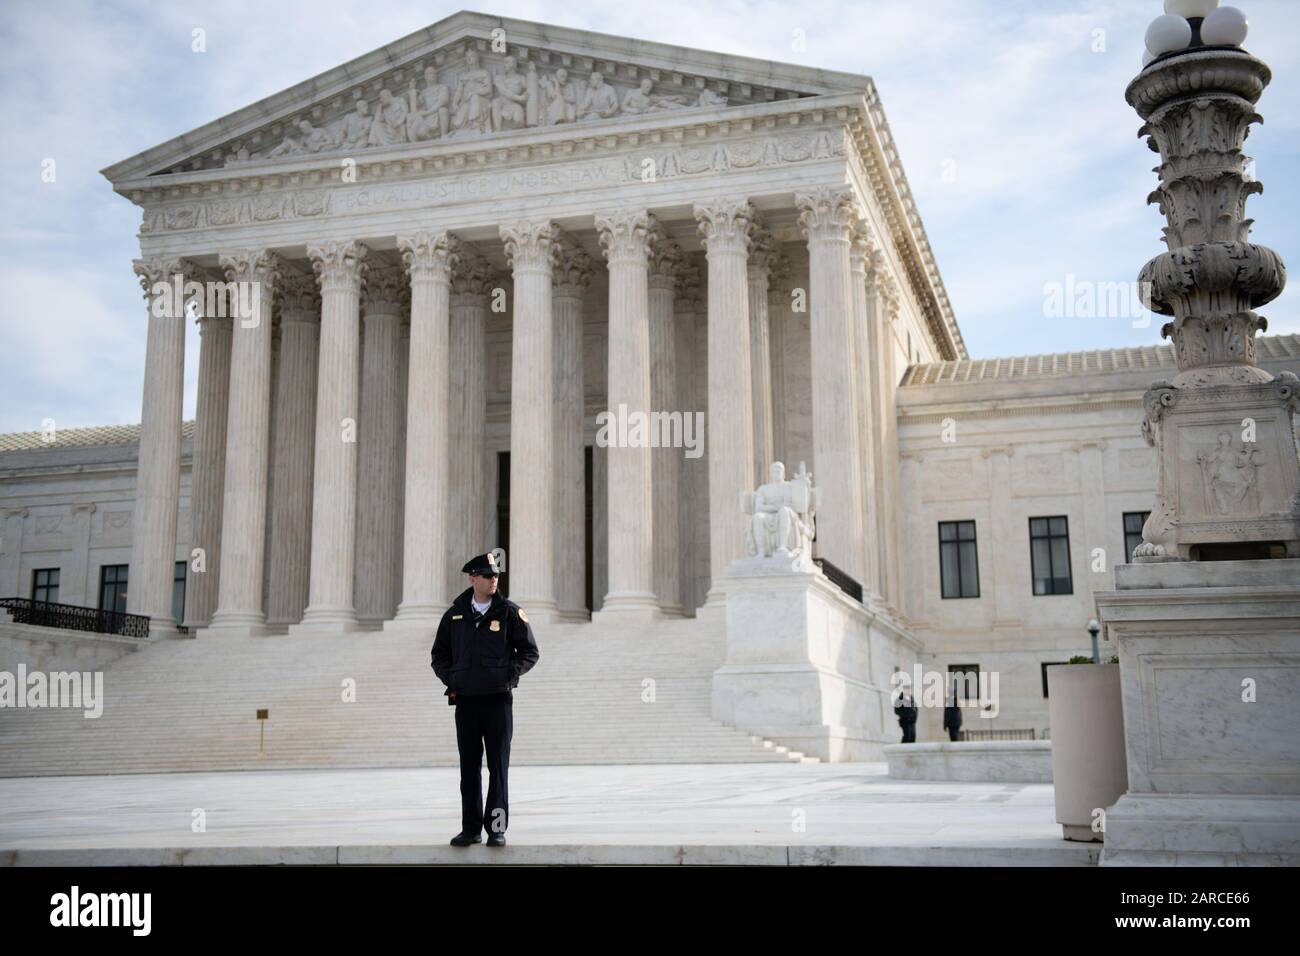 A member of the Capitol Police stands in front of the U.S. Supreme Court in Washington, D.C., as seen on January 27, 2020. Today Chief Justice John Roberts presides over day two of President Donald Trump's defense in the Senate Impeachment trial as new details emerge from a draft of former National Security Advisor John Bolton's forthcoming book. (Graeme Sloan/Sipa USA) (Graeme Sloan/Sipa USA) Stock Photo